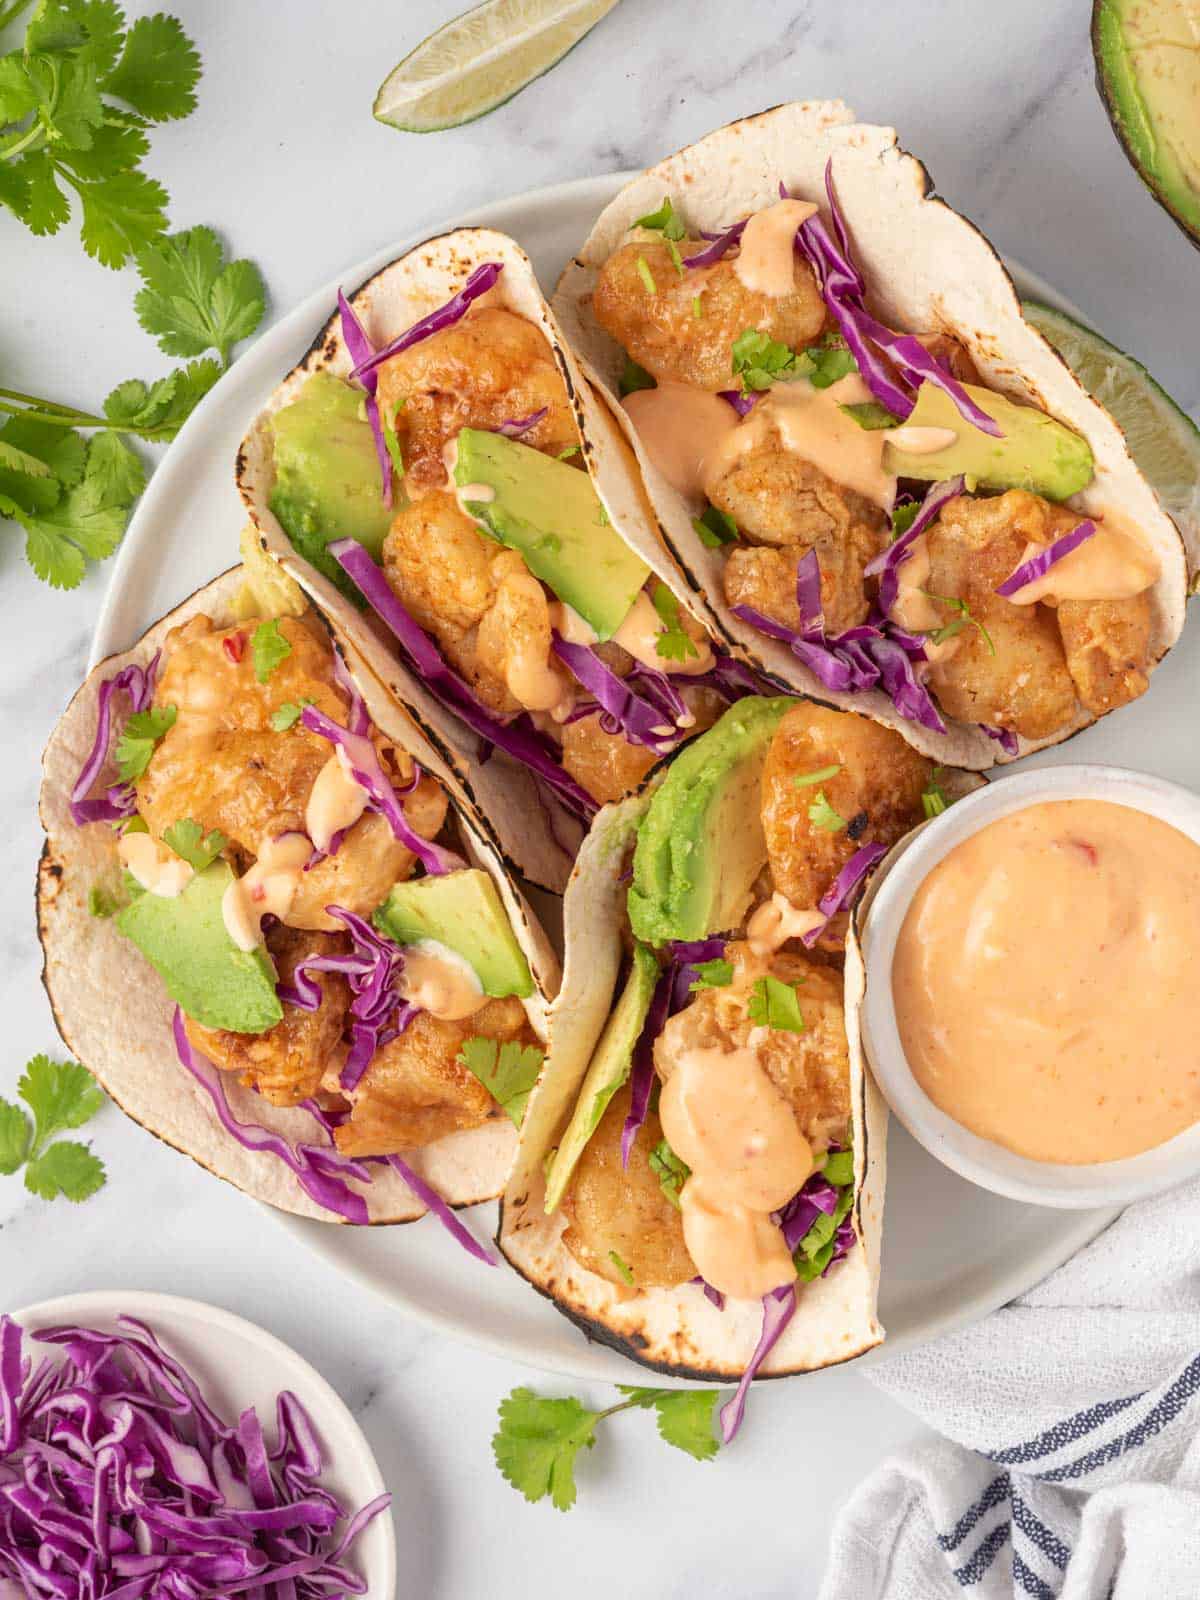 A plate of spicy shrimp tacos with dynamite sauce.